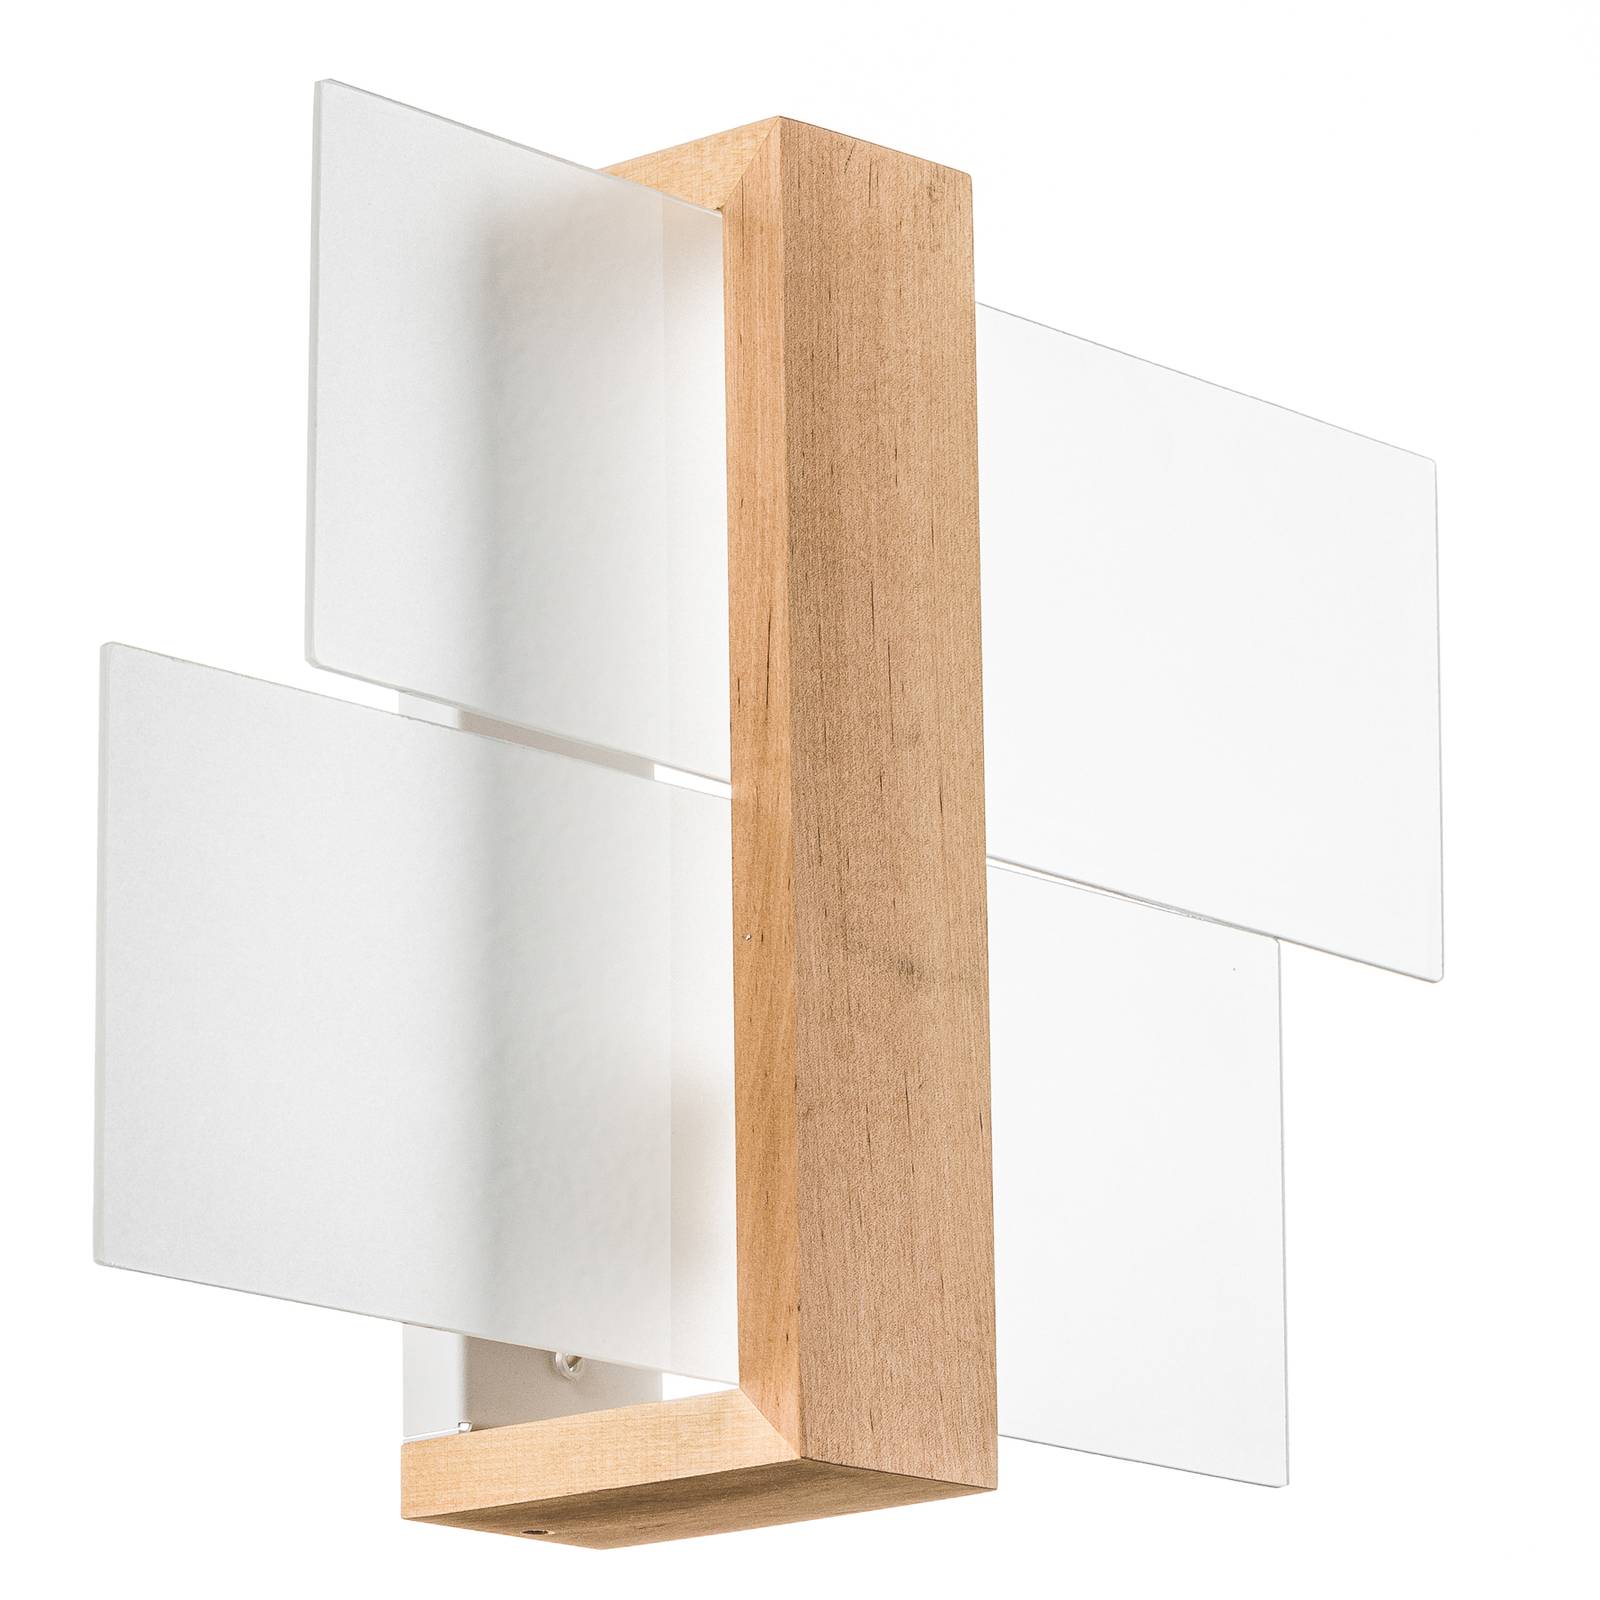 Wandleuchte Shifted 1, Glas und helles Holz